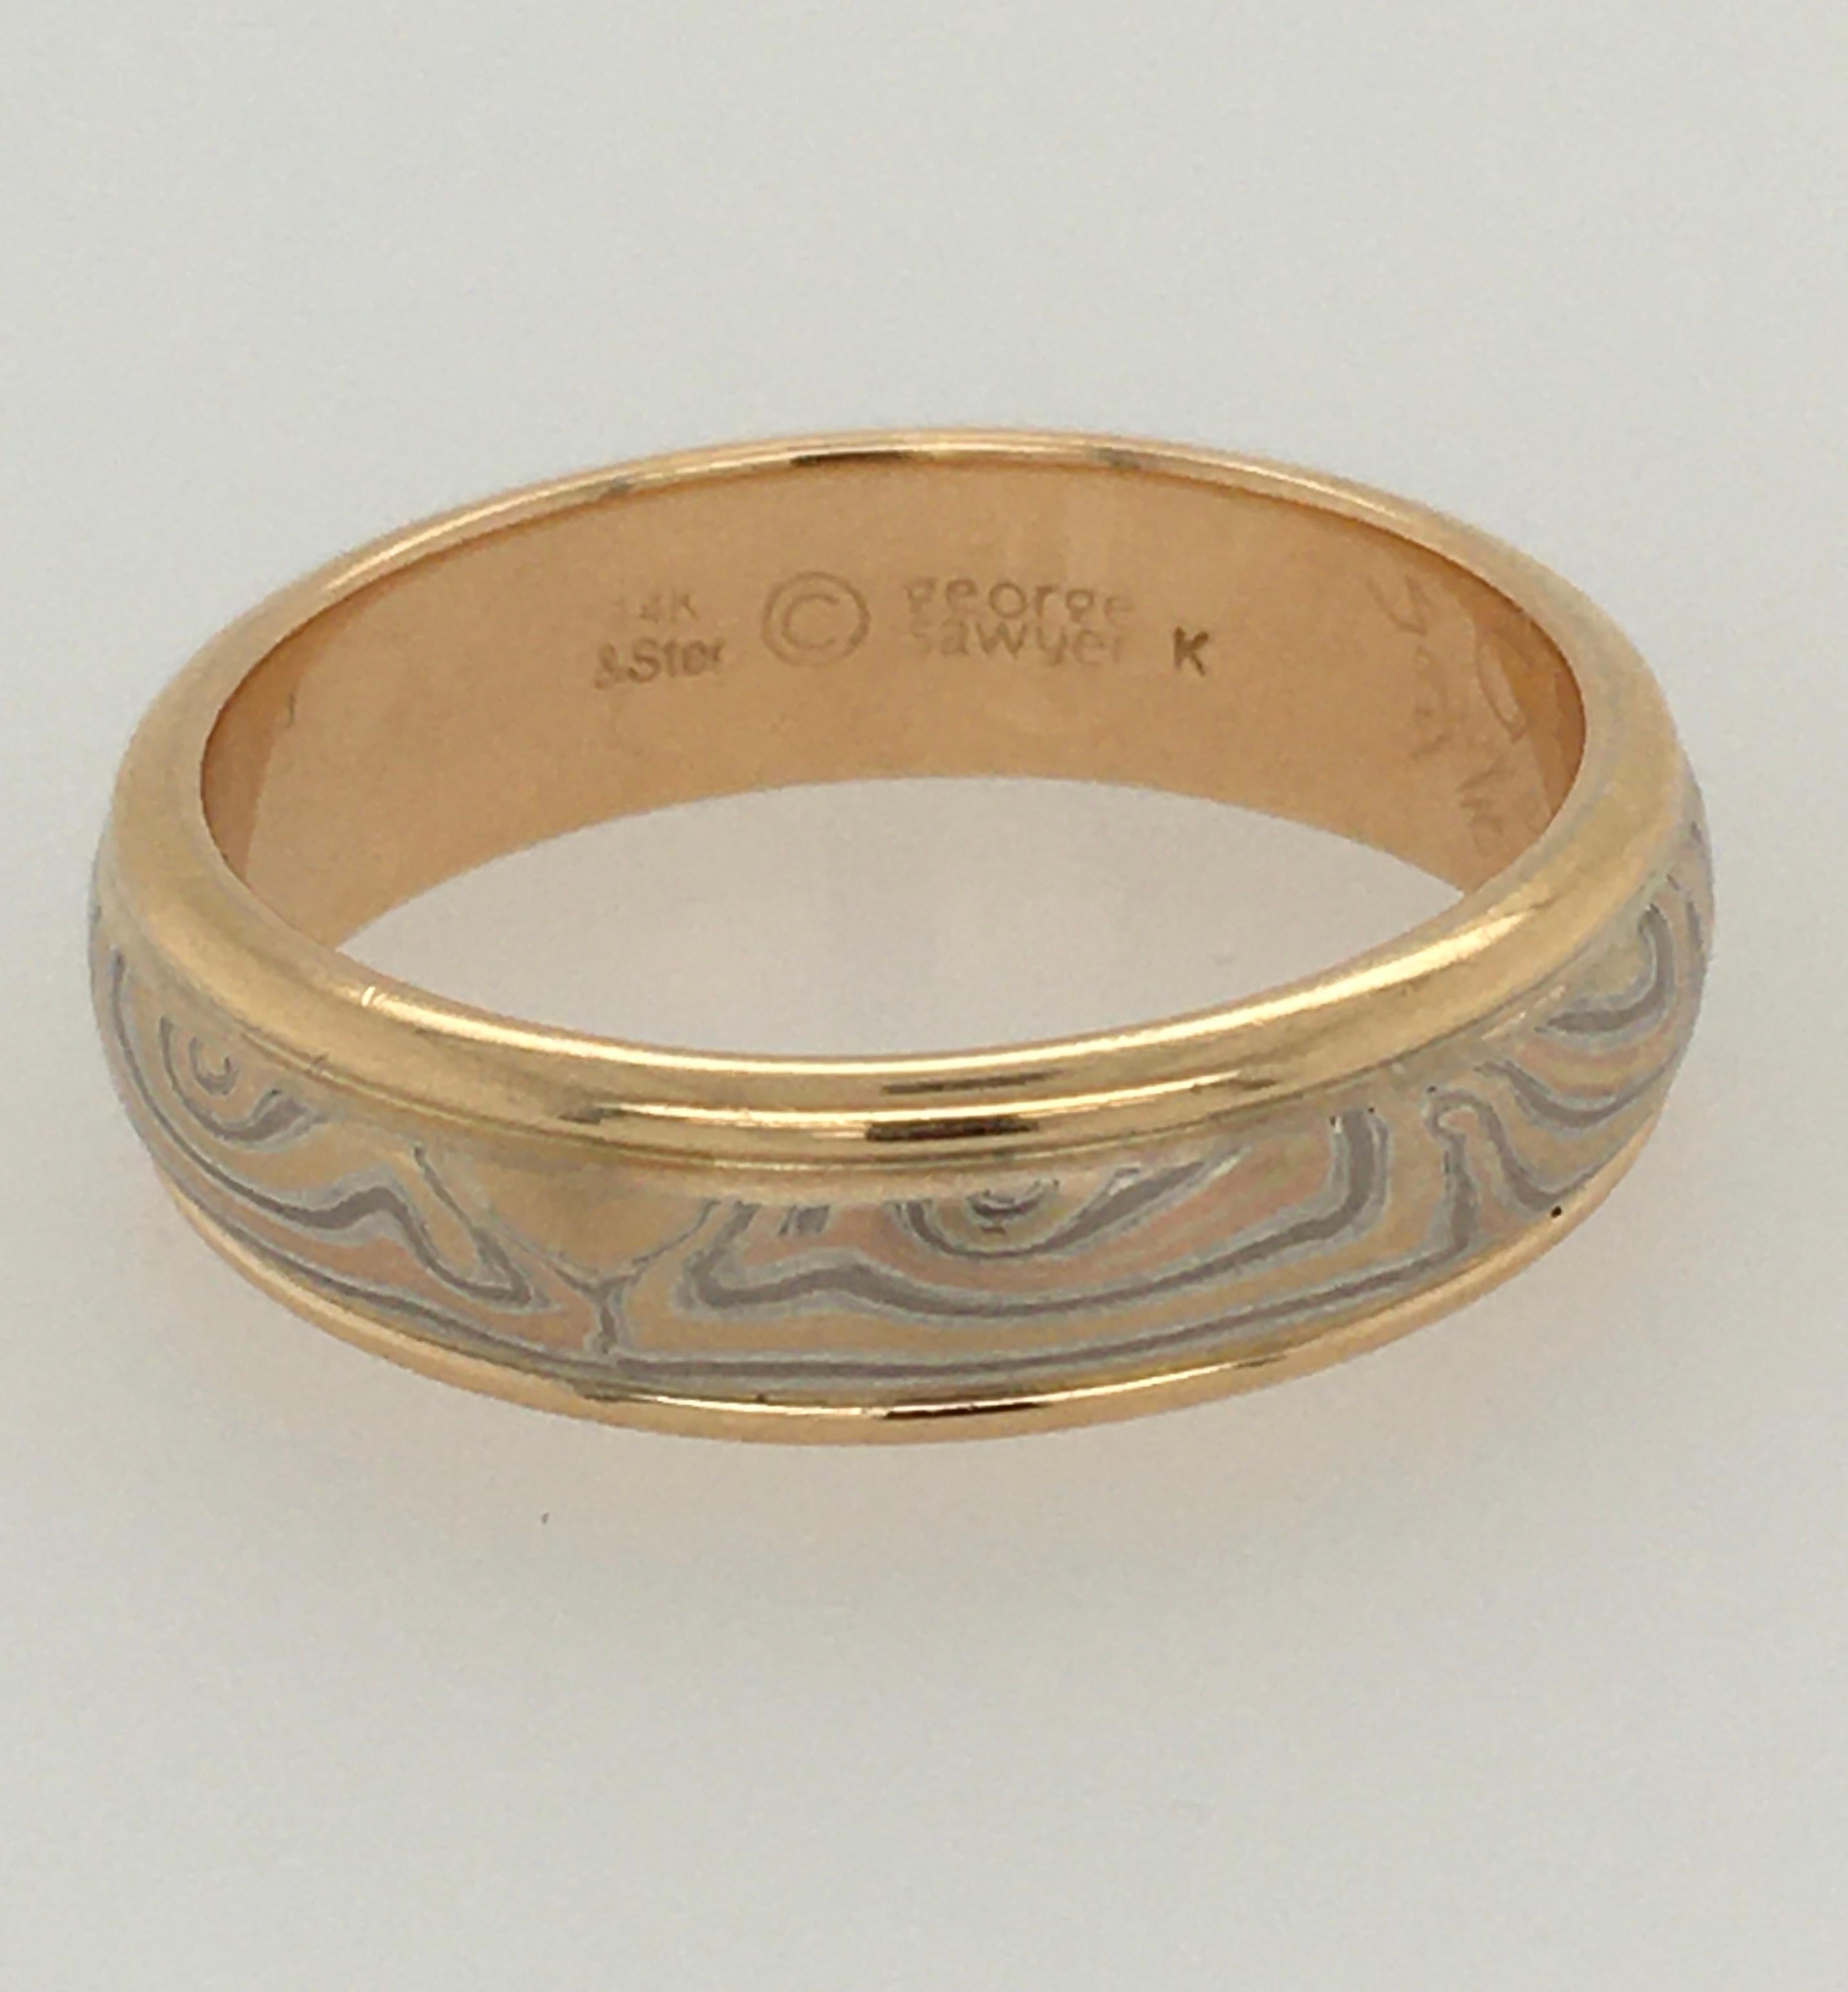 GEORGE SAWYER Mokume Round Edge w/ Gold and Etched Copper Ring at ...